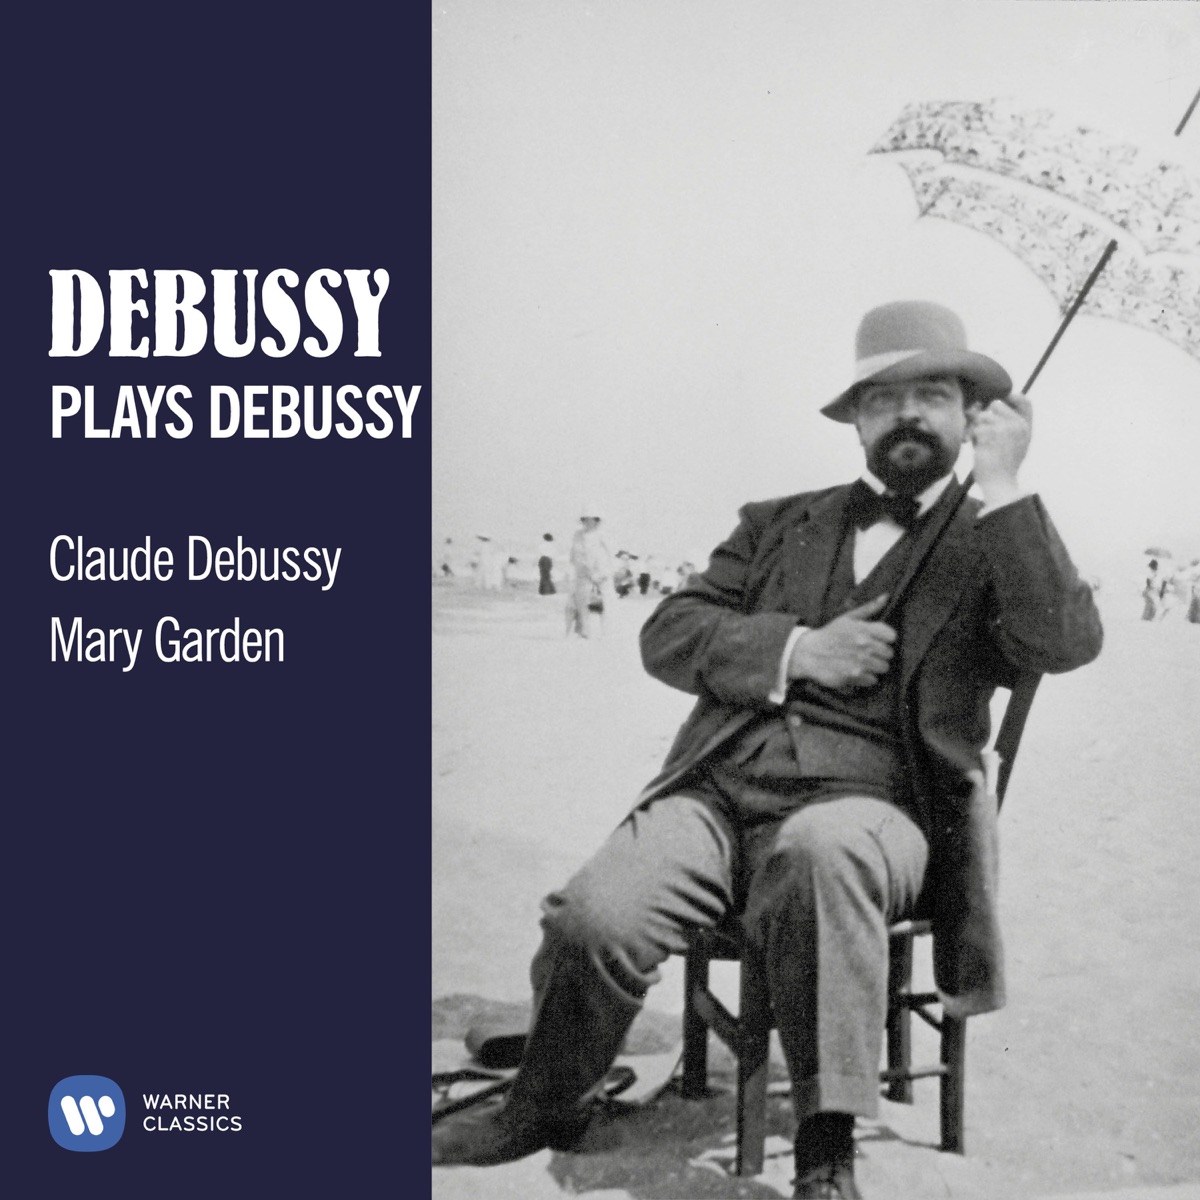 Debussy plays Debussy - EP by Mary Garden on Apple Music